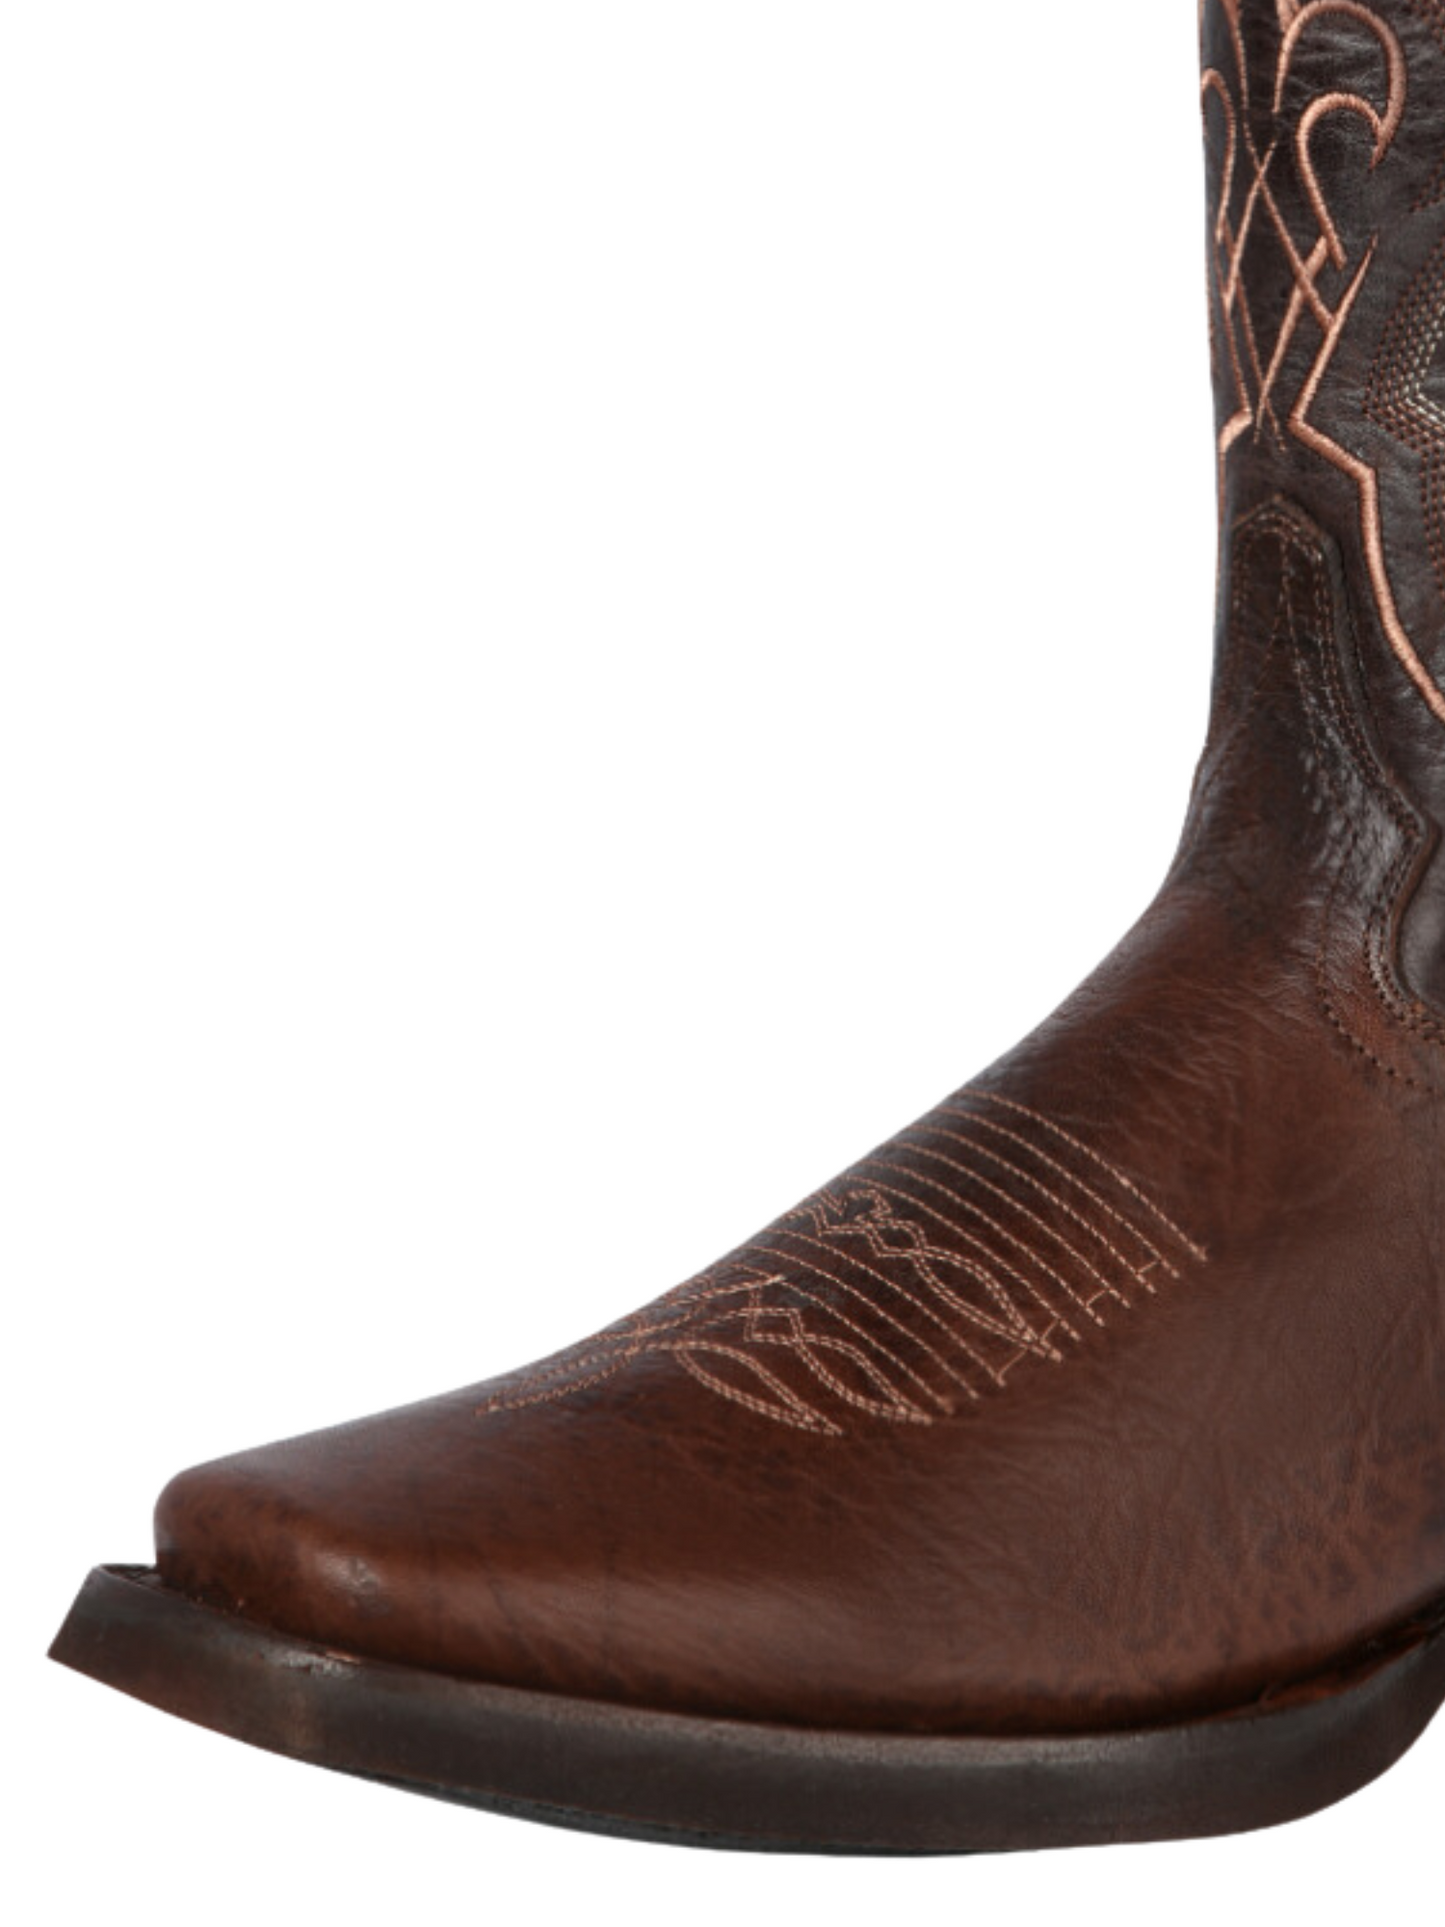 Classic Genuine Leather Rodeo Cowboy Boots for Men 'El General' - ID: 44655 Cowboy Boots El General